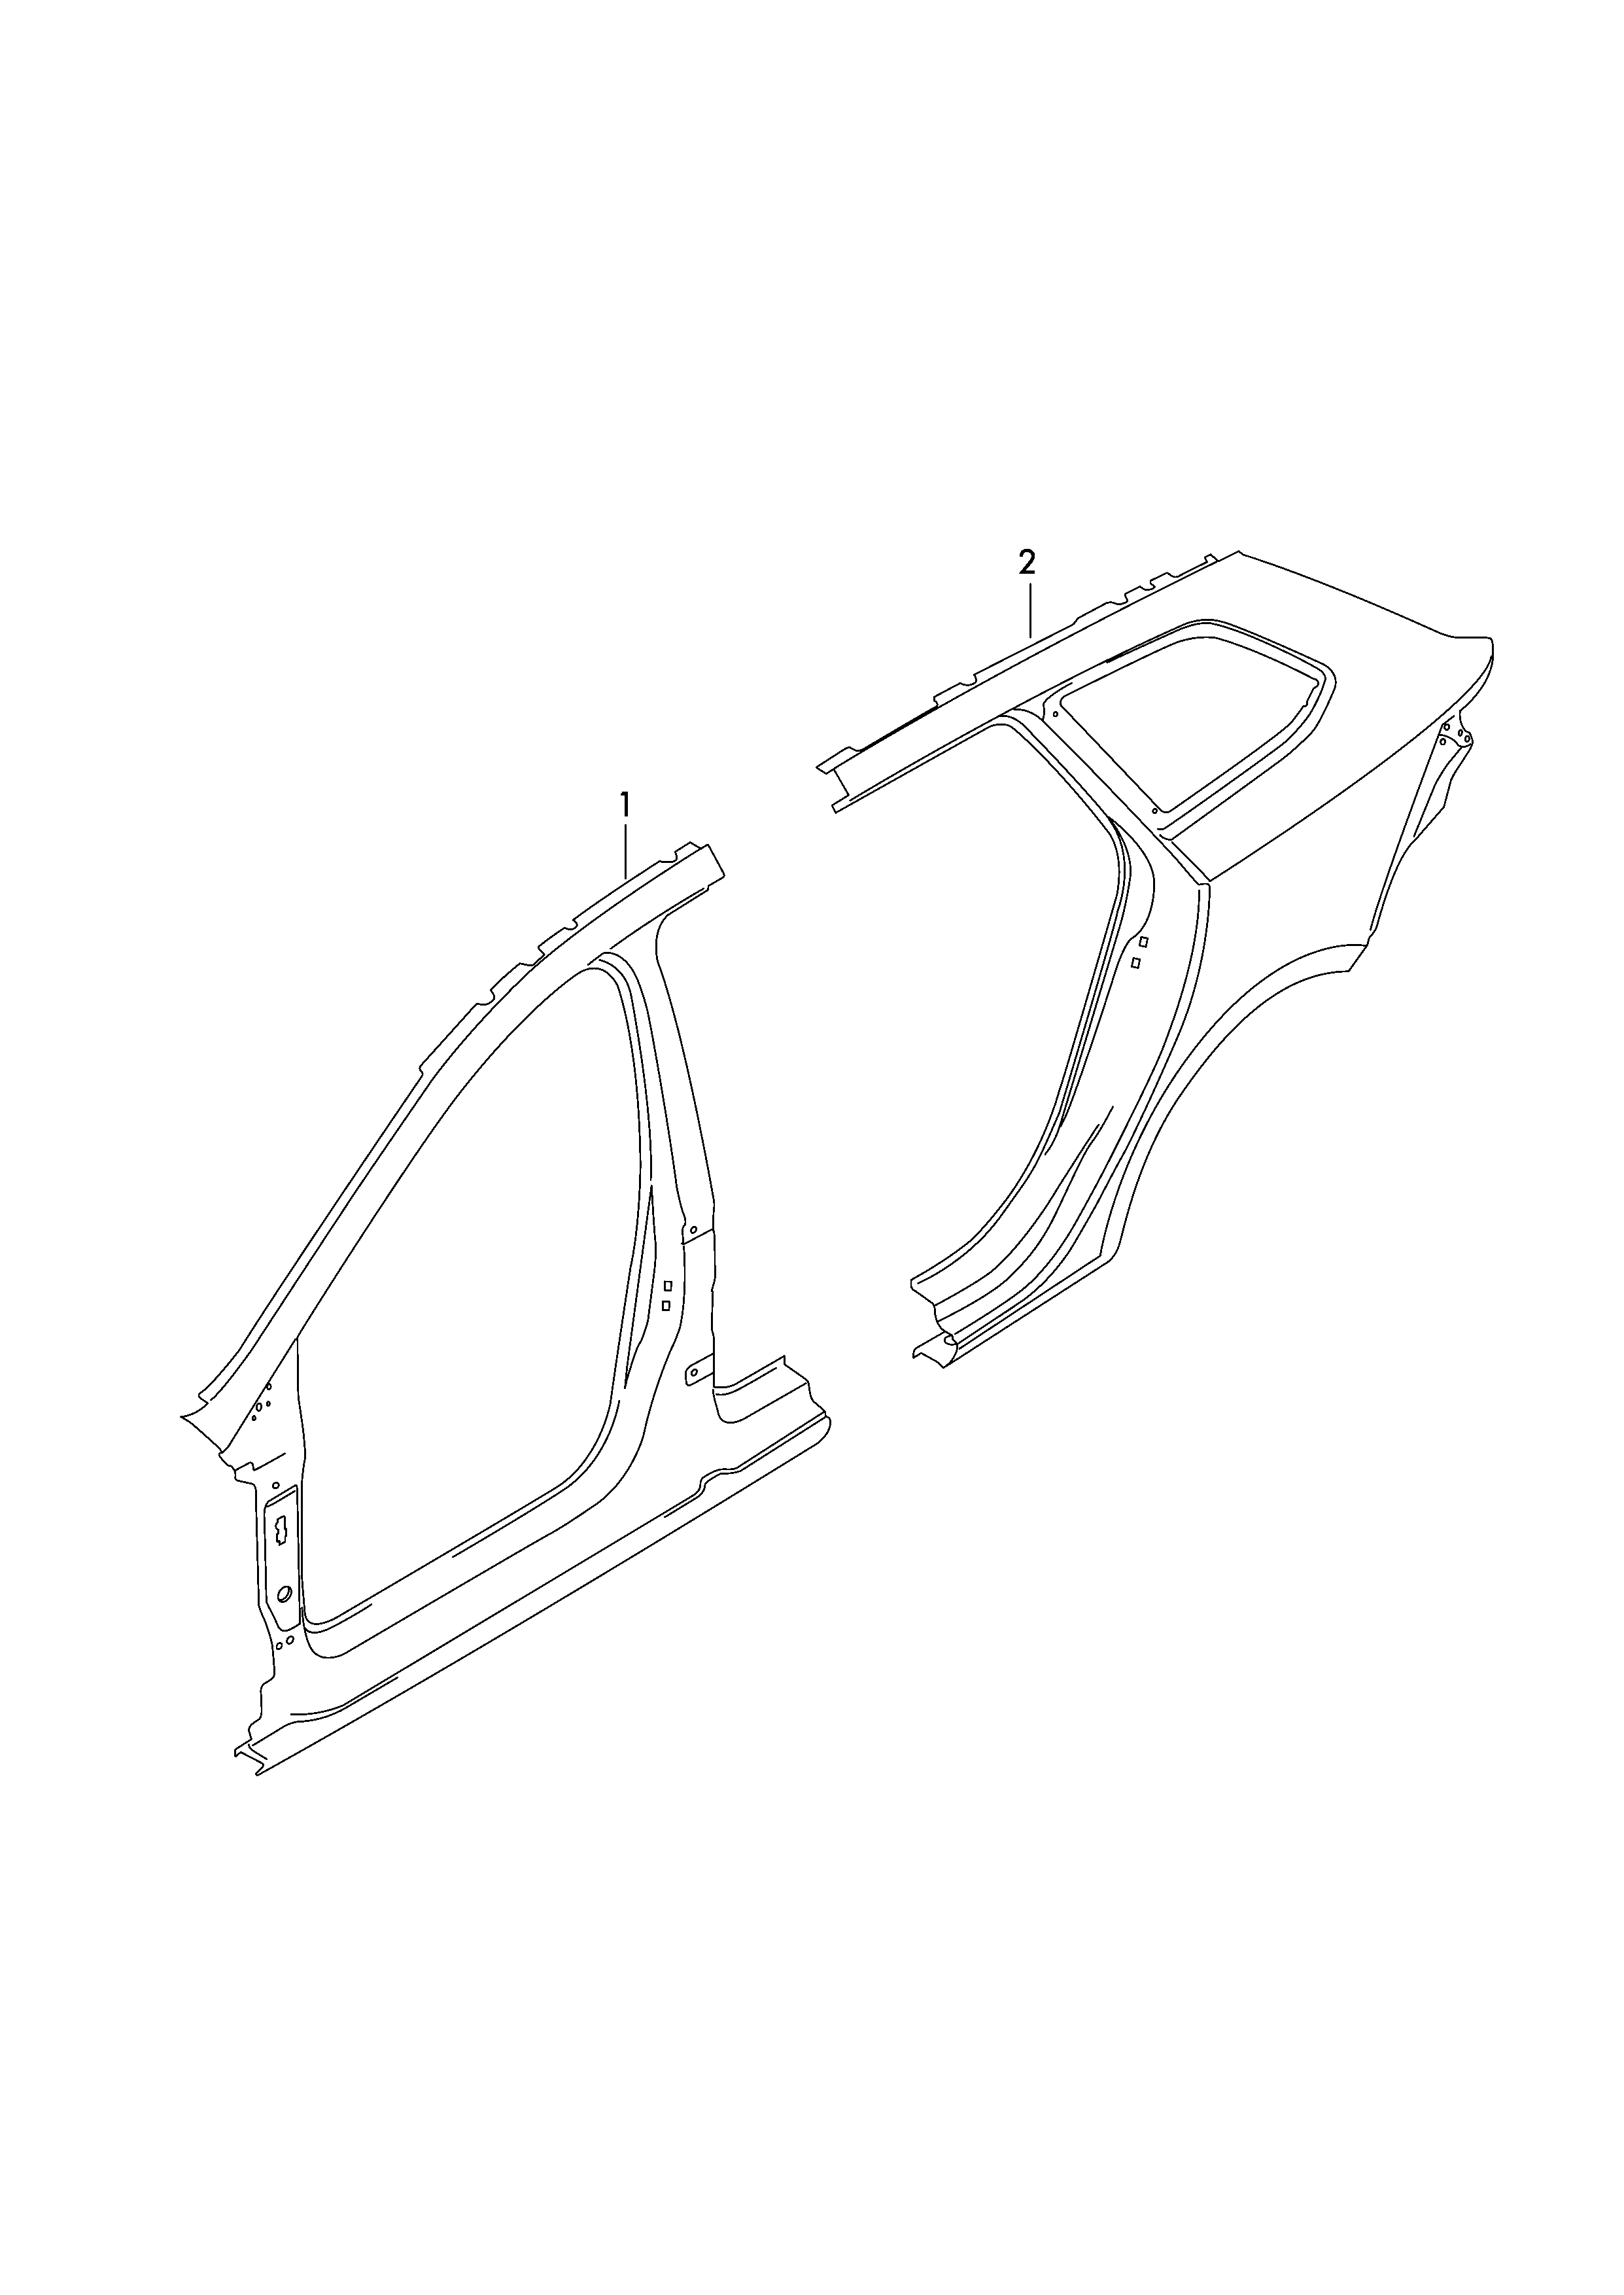 sectional parts for the
side section - Leon/Leon 4(LE)  